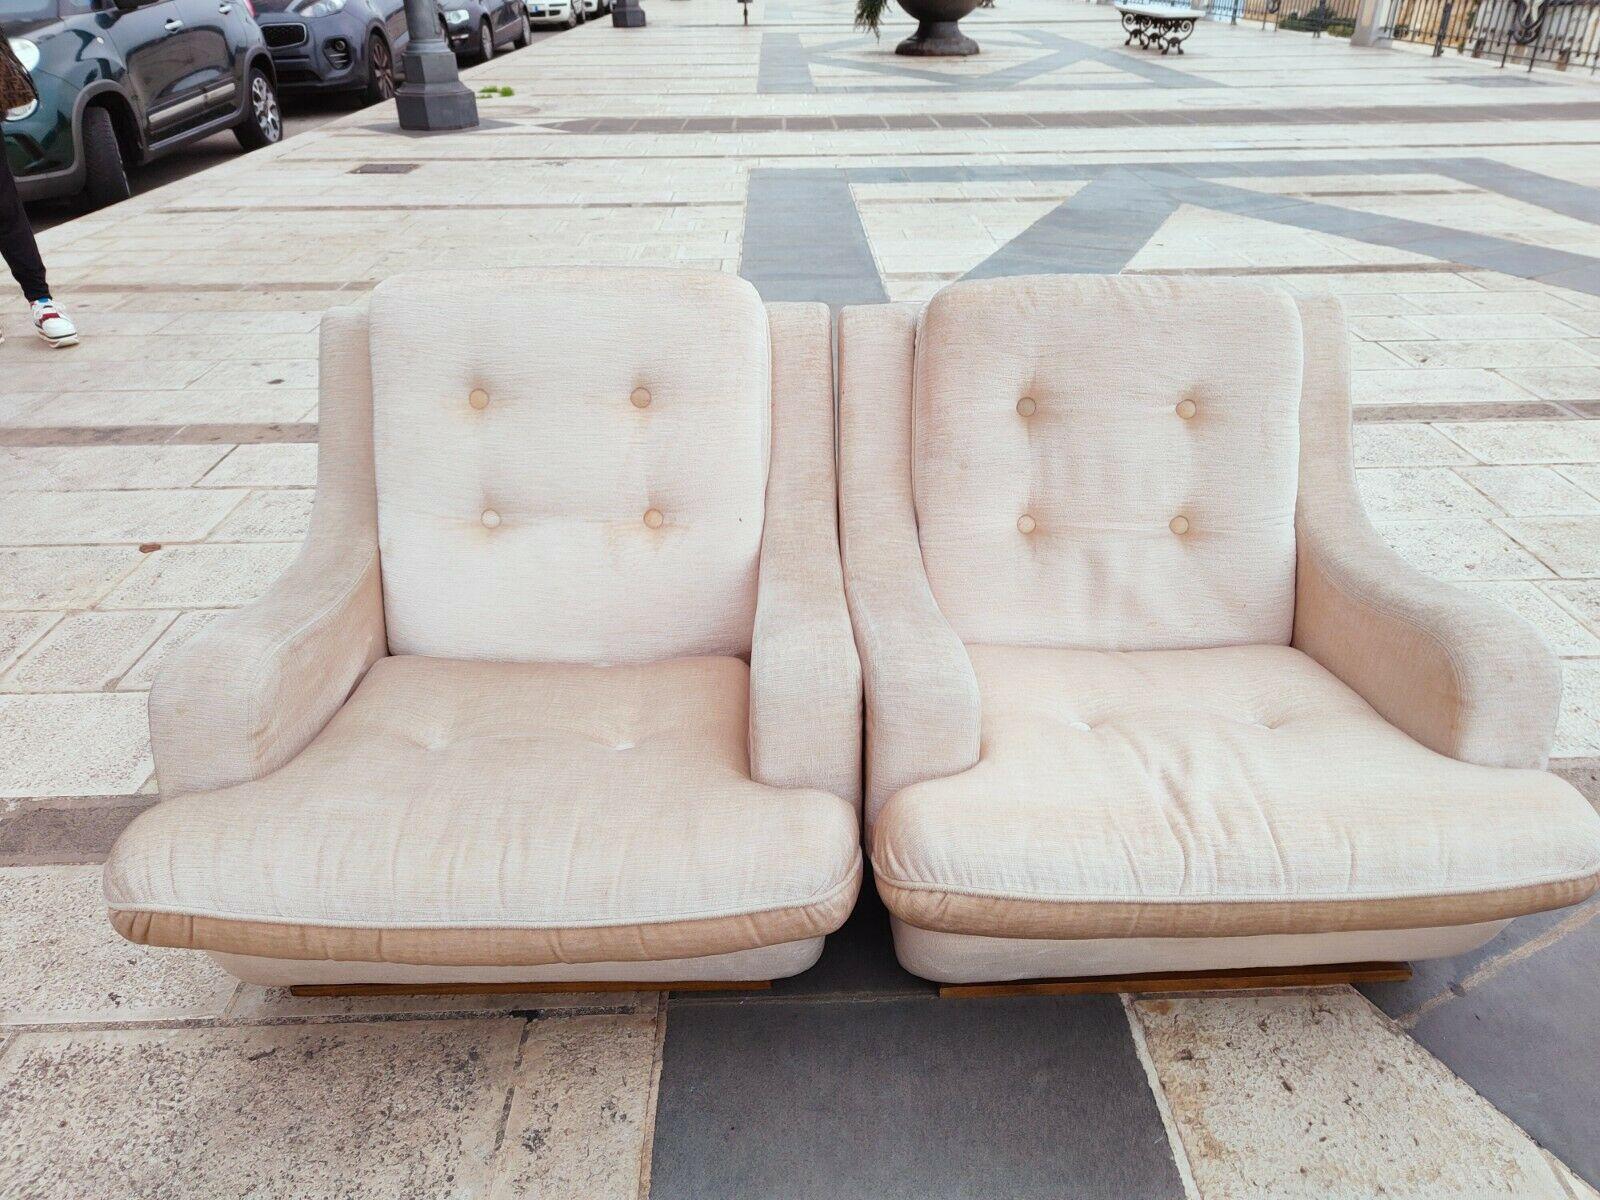 Huge modular living room from the 70s, probably produced by De Sede, consisting of a pair of single armchairs, a curved sofa and a linear one, and an end armchair

Sand beige color, lower plinth in wood

The single armchairs measure 80 cm in